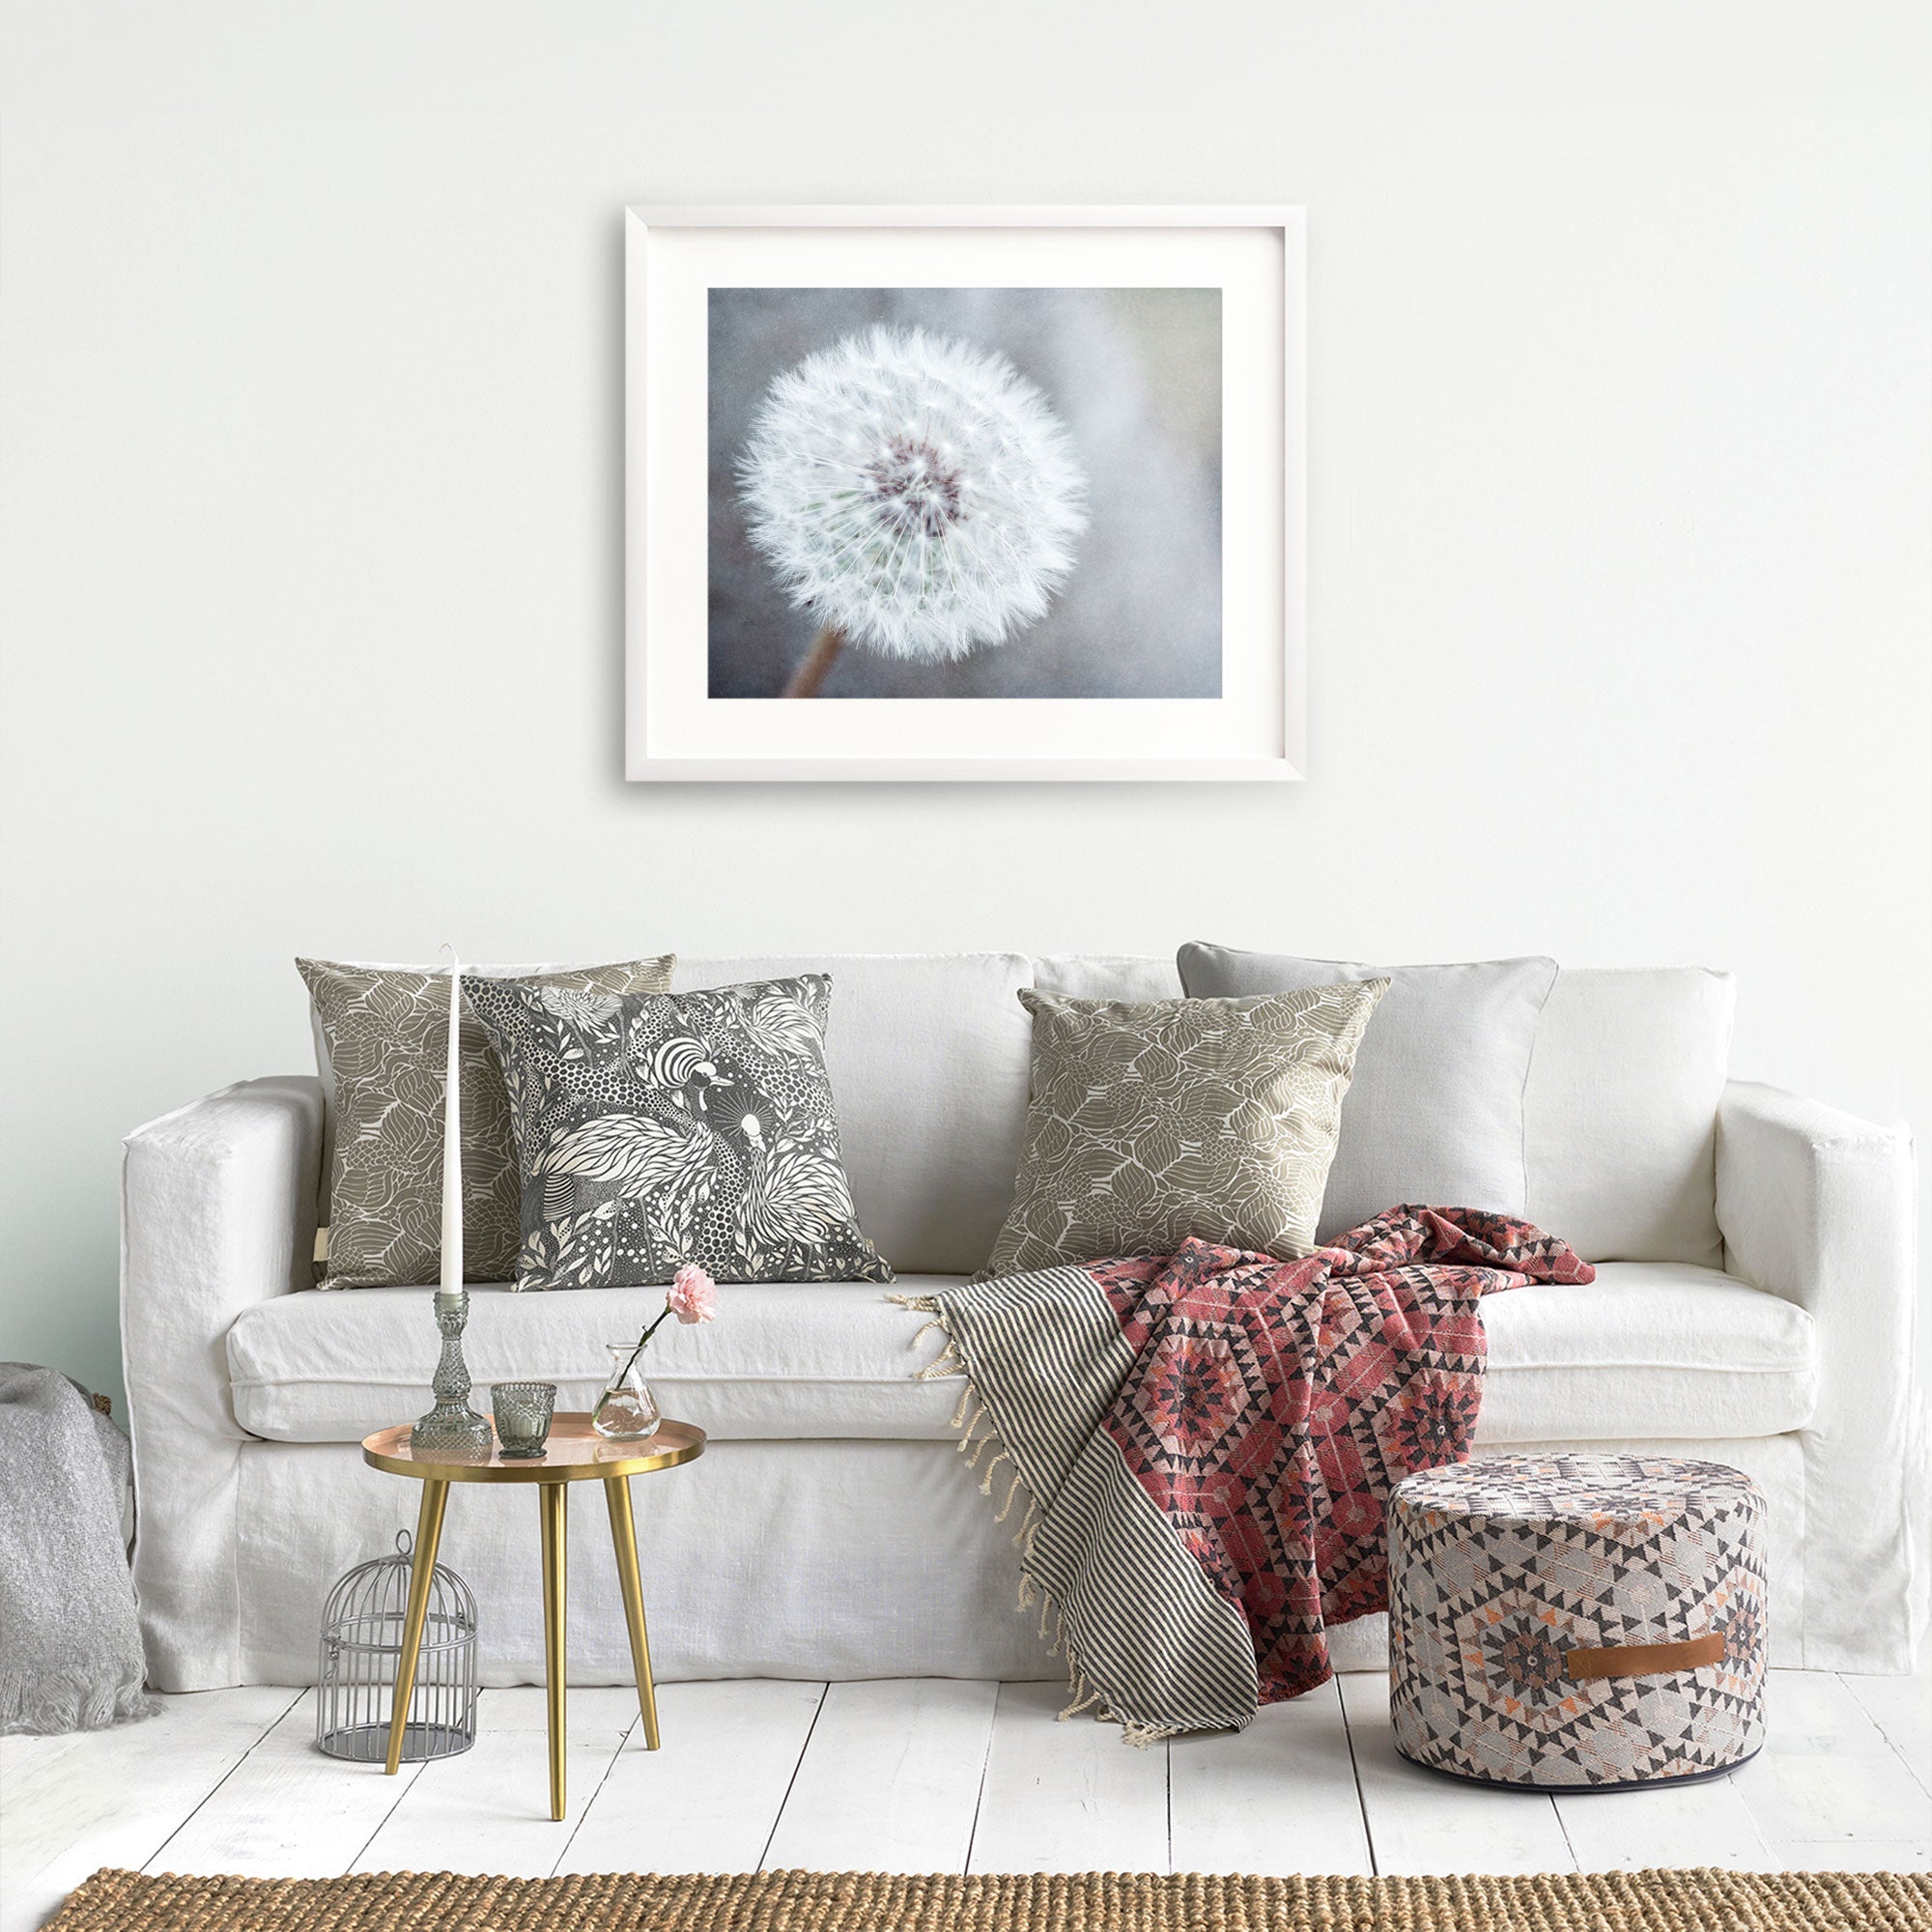 A cozy living room scene featuring a white sofa with decorative pillows, an unframed Neutral Grey Floral Print of a dandelion on the wall, a small round table with books, a birdcage, and 'Dandelion King' by Offley Green.